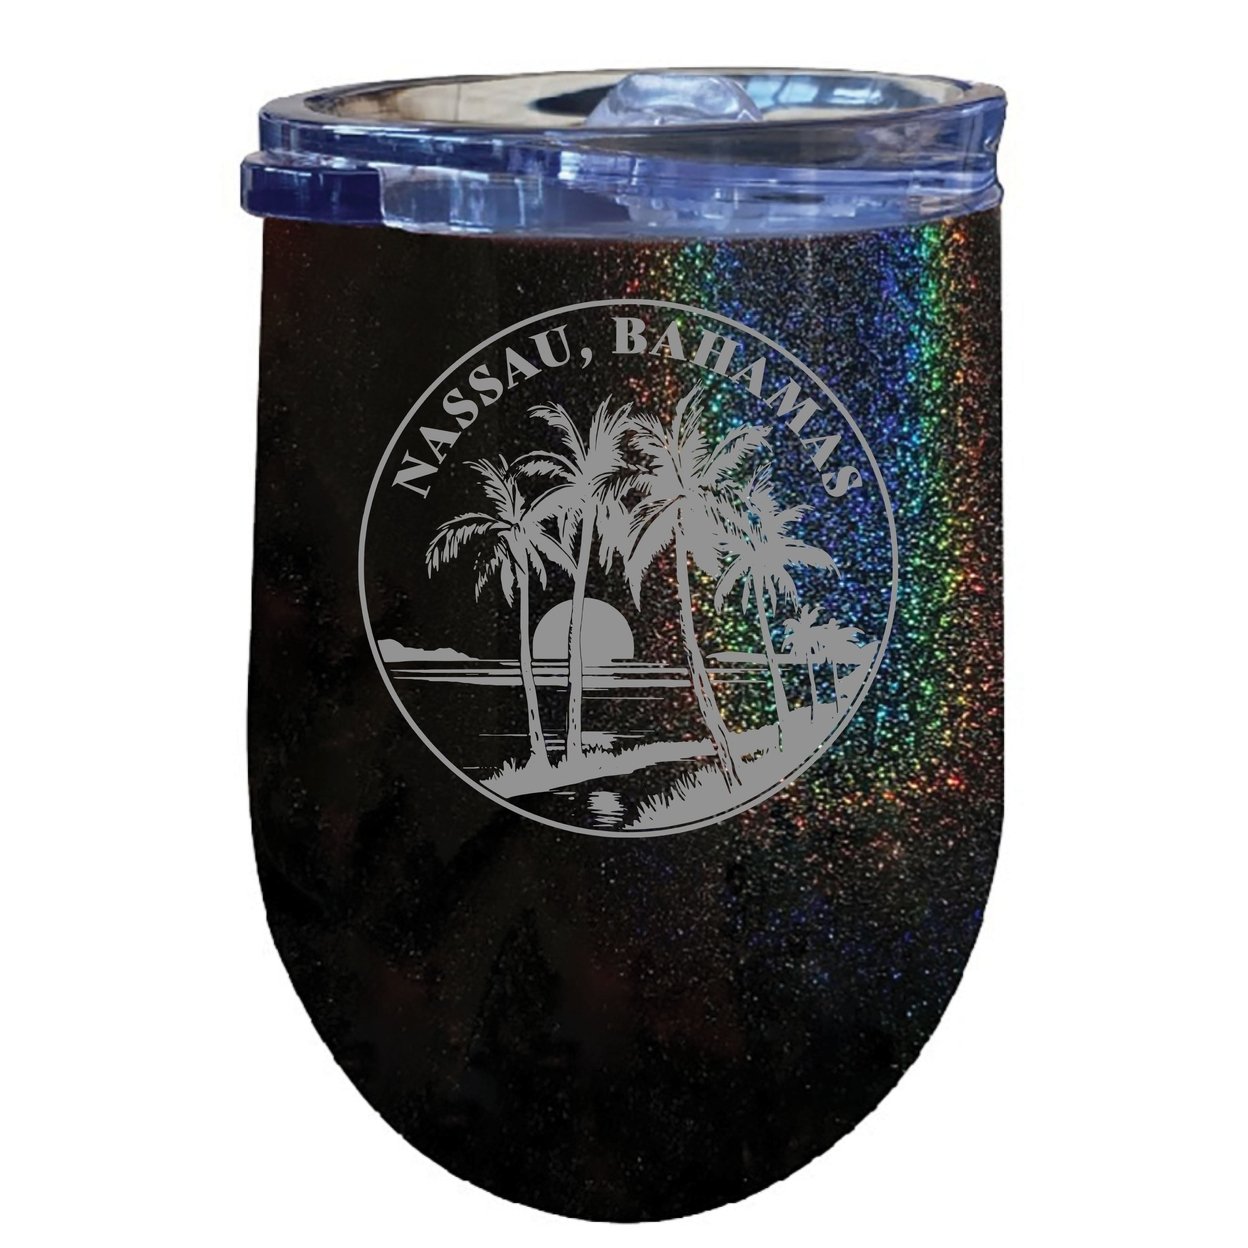 Nassau The Bahamas Souvenir 12 Oz Engraved Insulated Wine Stainless Steel Tumbler - Purple,,4-Pack